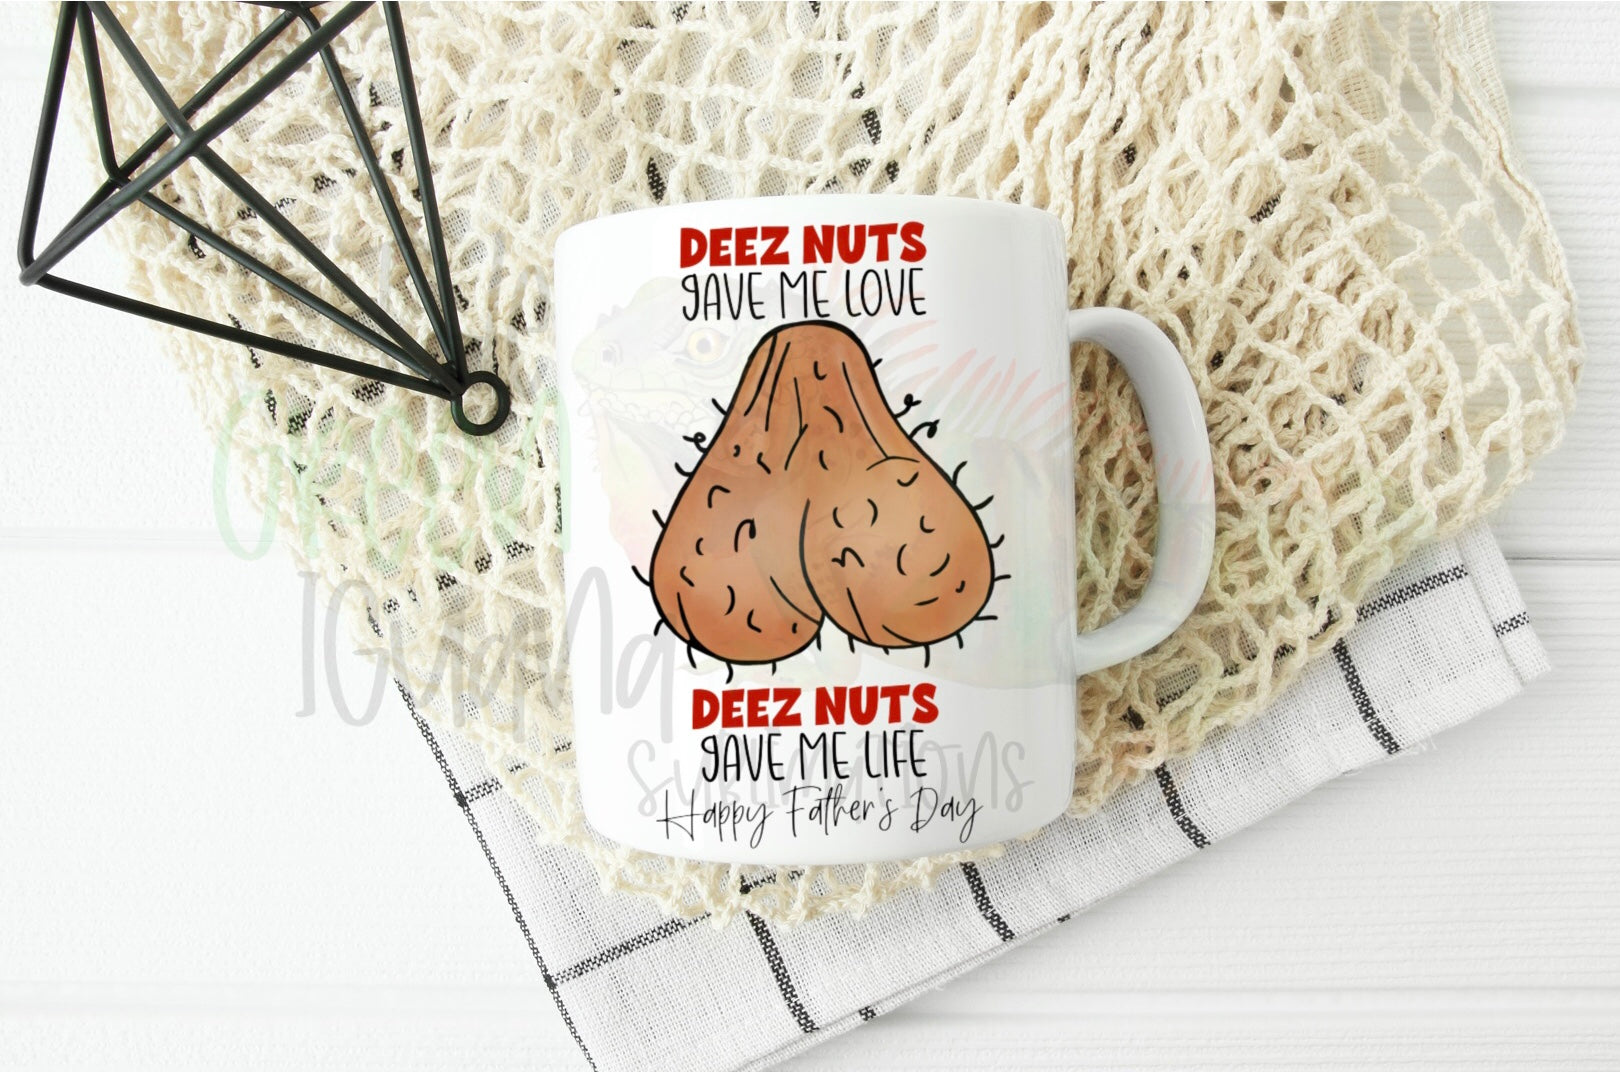 Deez nuts gave me love, deez nuts gave me life. Happy Father’s Day